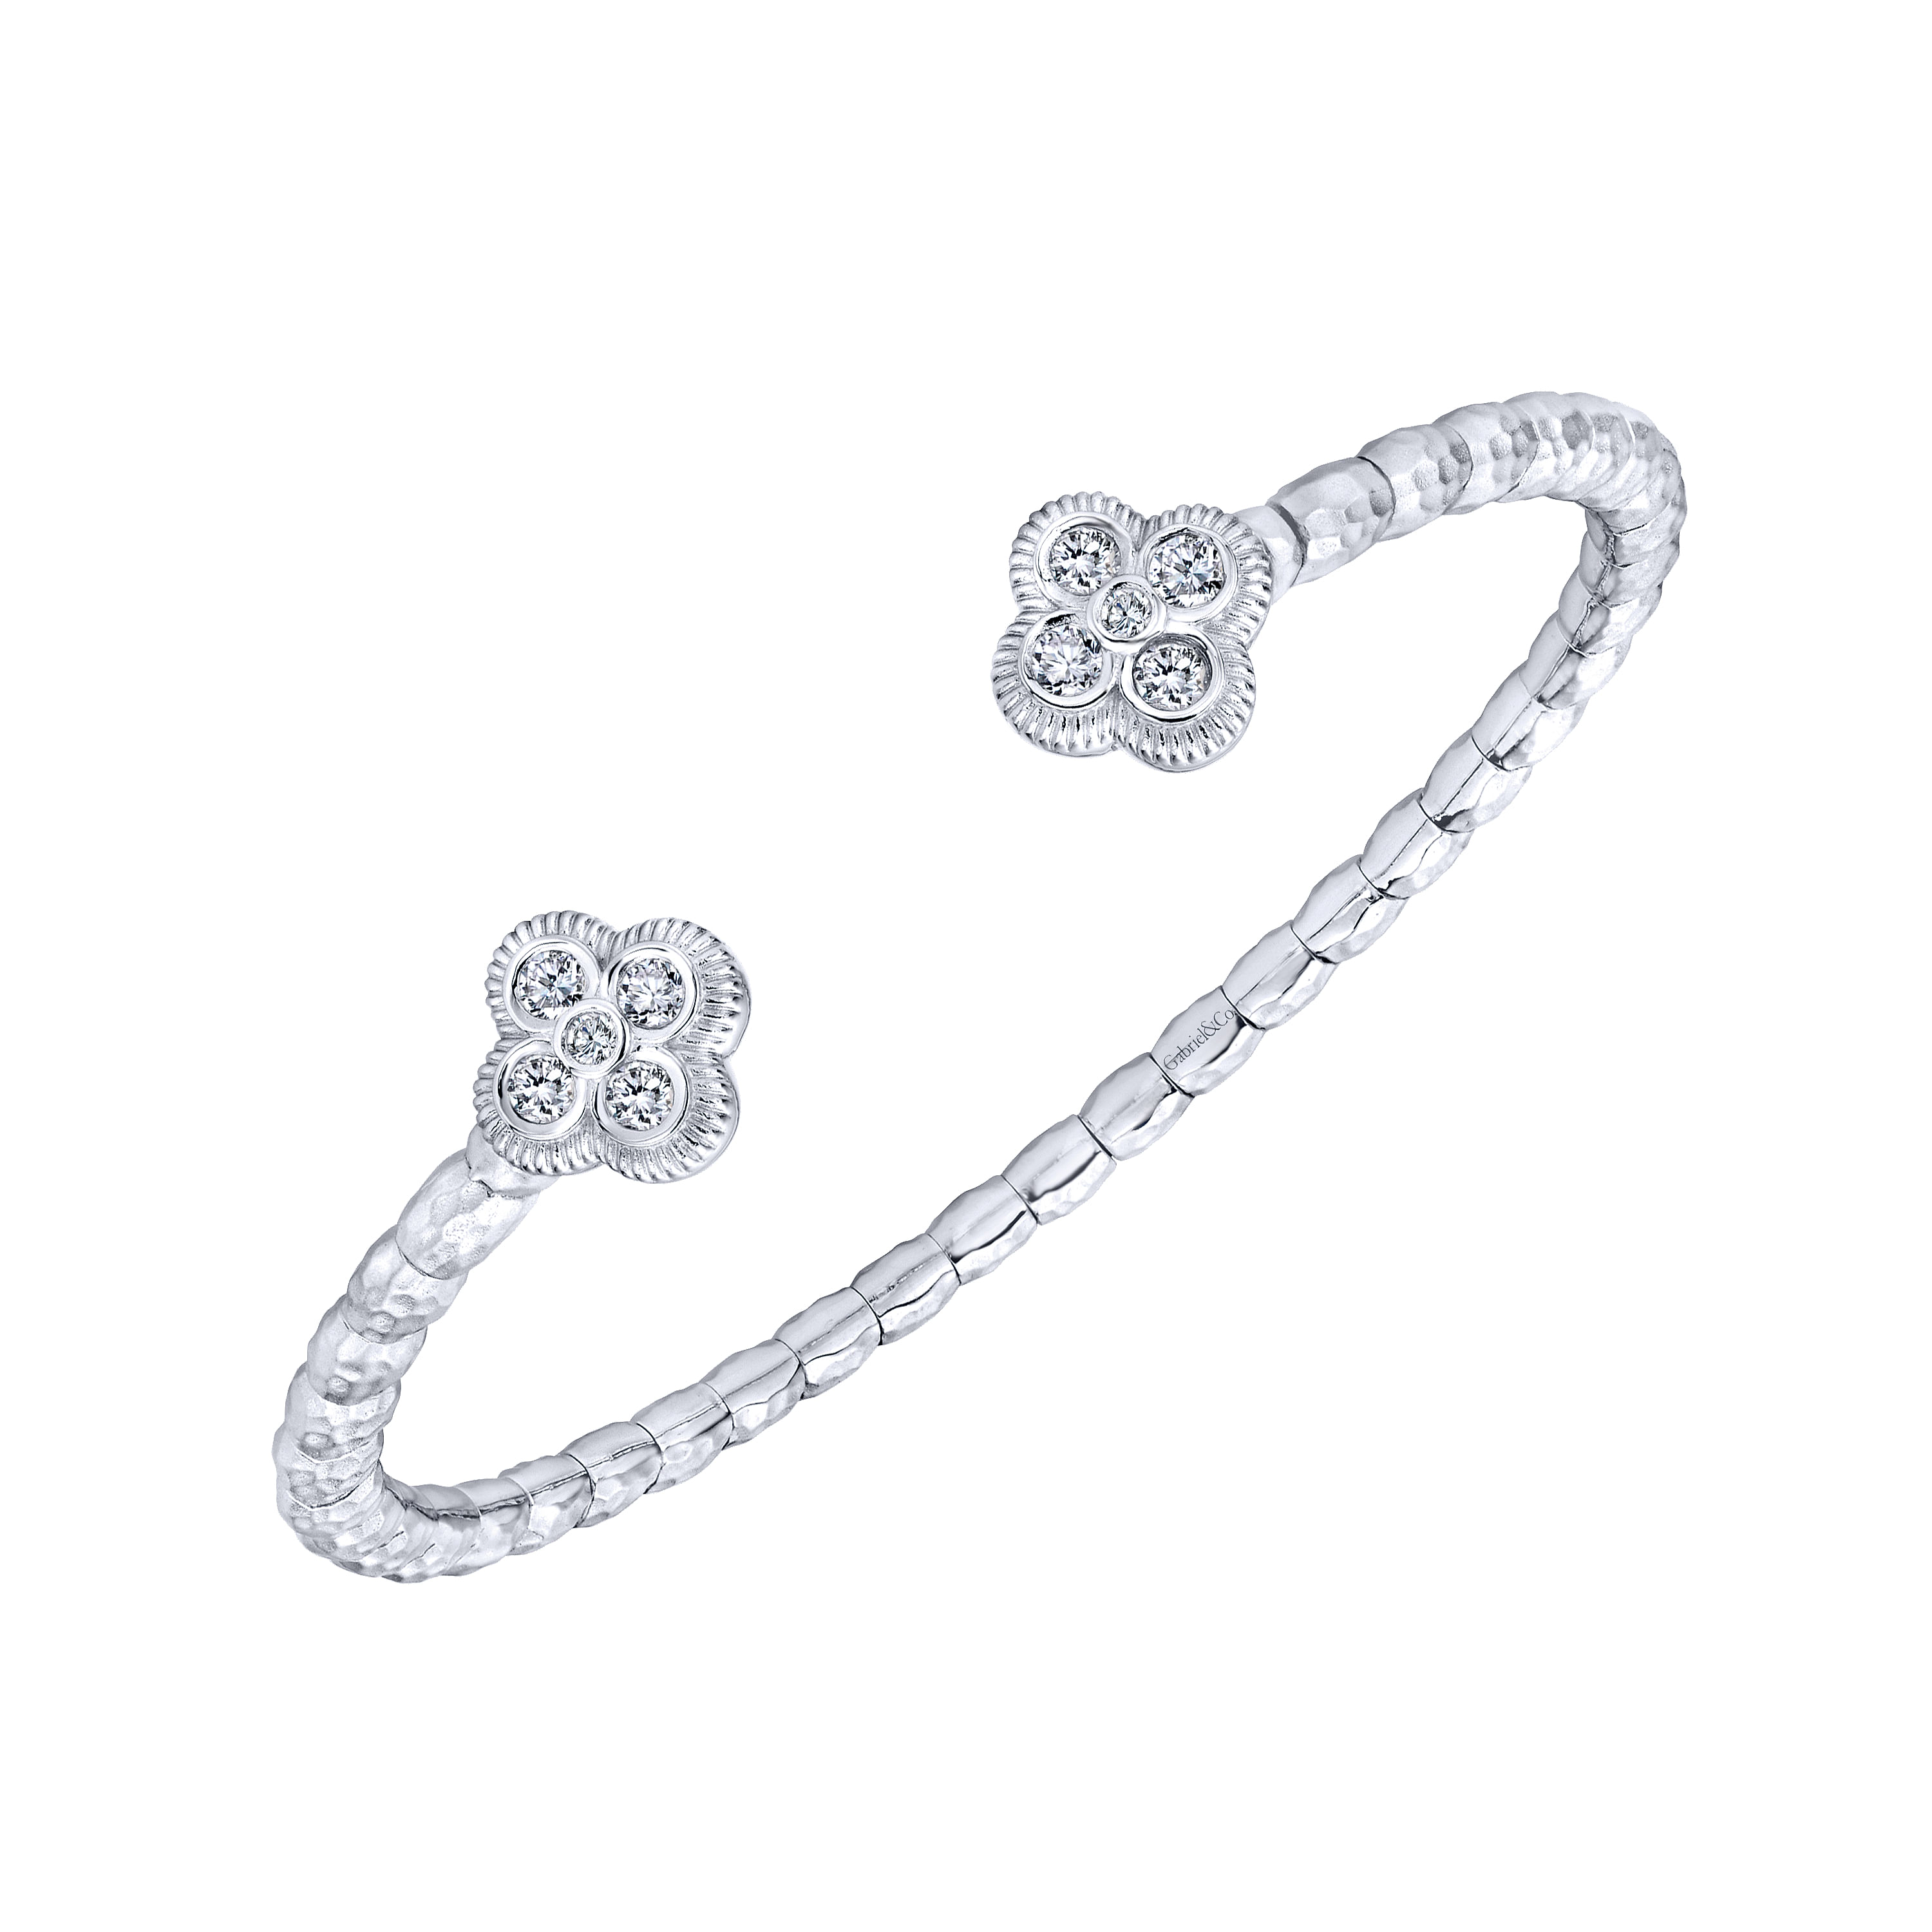 925 Sterling Silver and Stainless Steel White Sapphire Quatrefoil Bangle